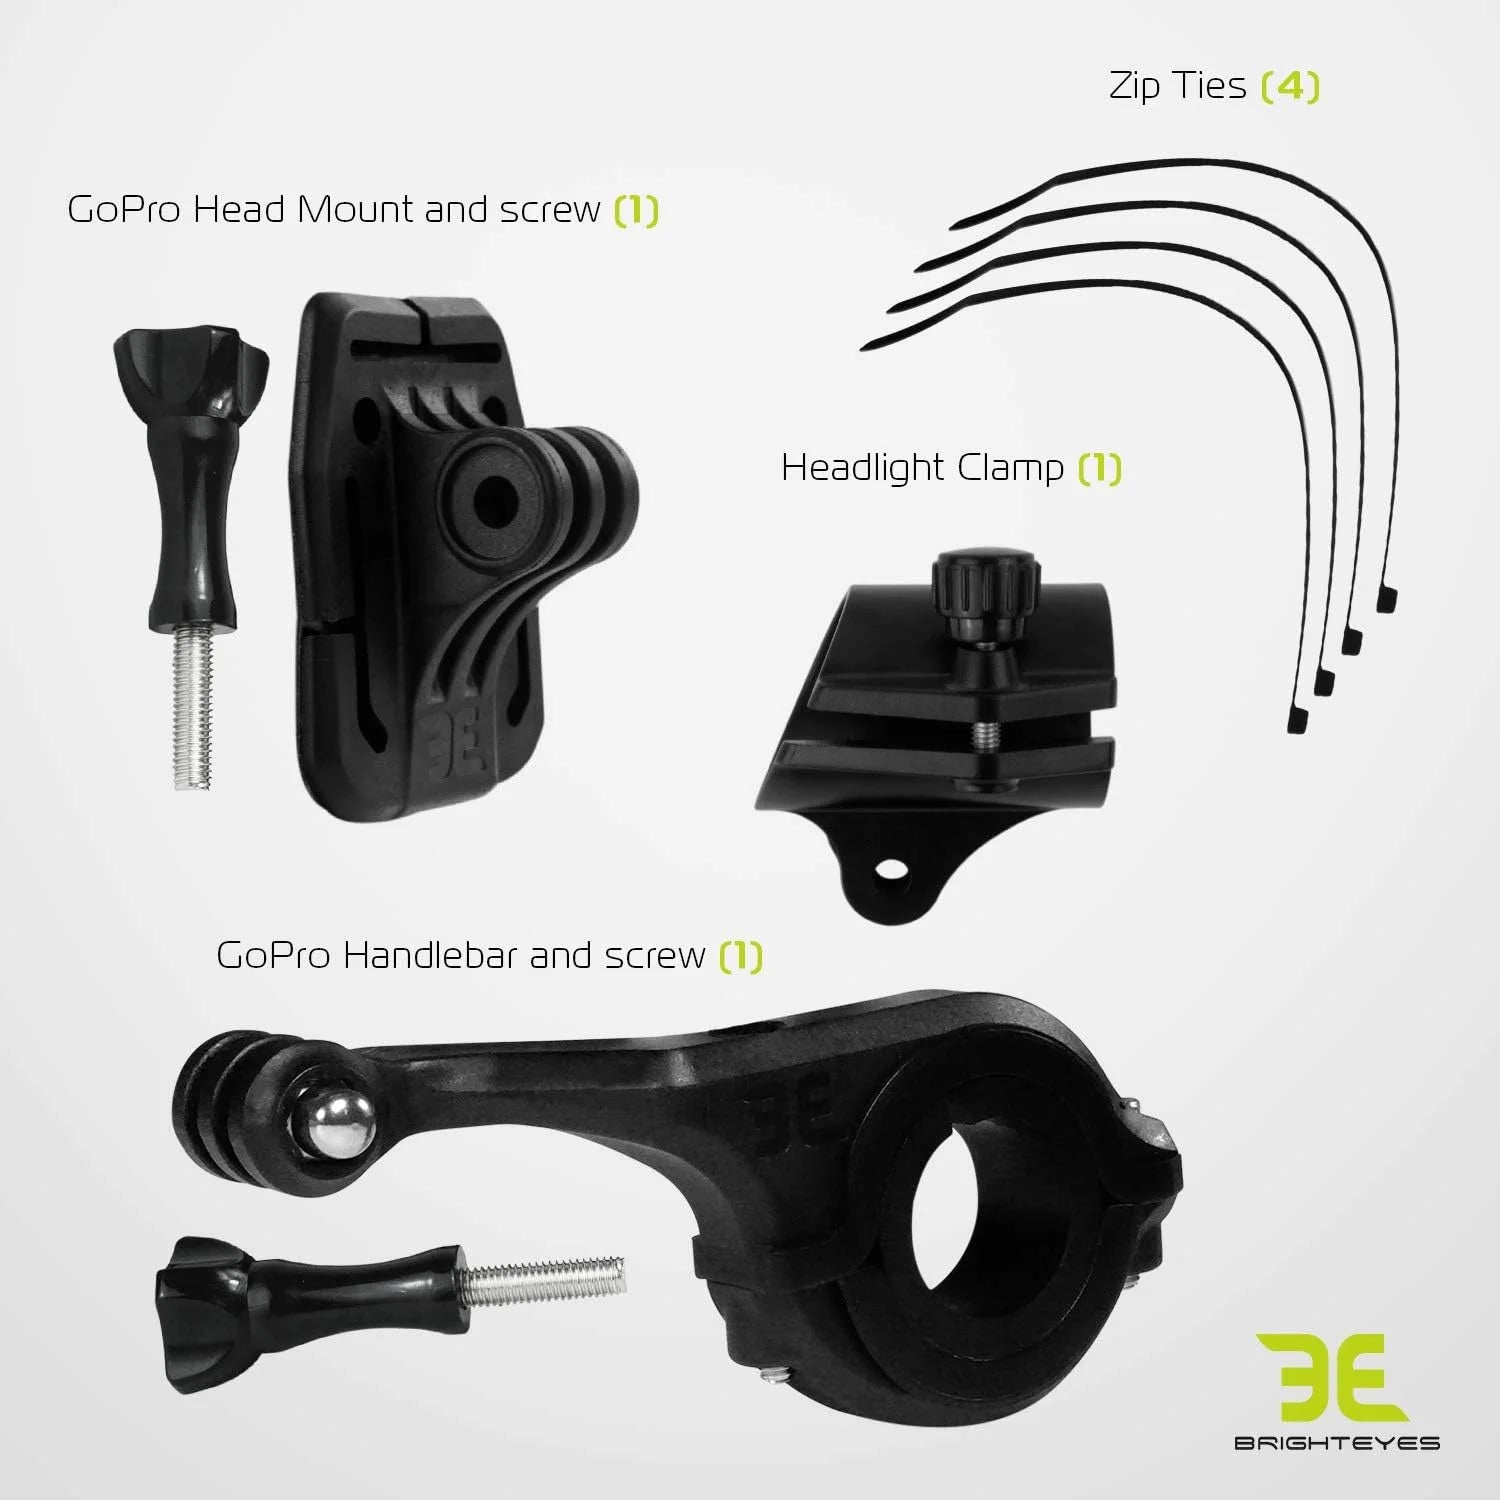 GoPro Mount for All Flashlight from 1 to 1-1/2" wide - Also for 300 Lumen Bike LIght Set